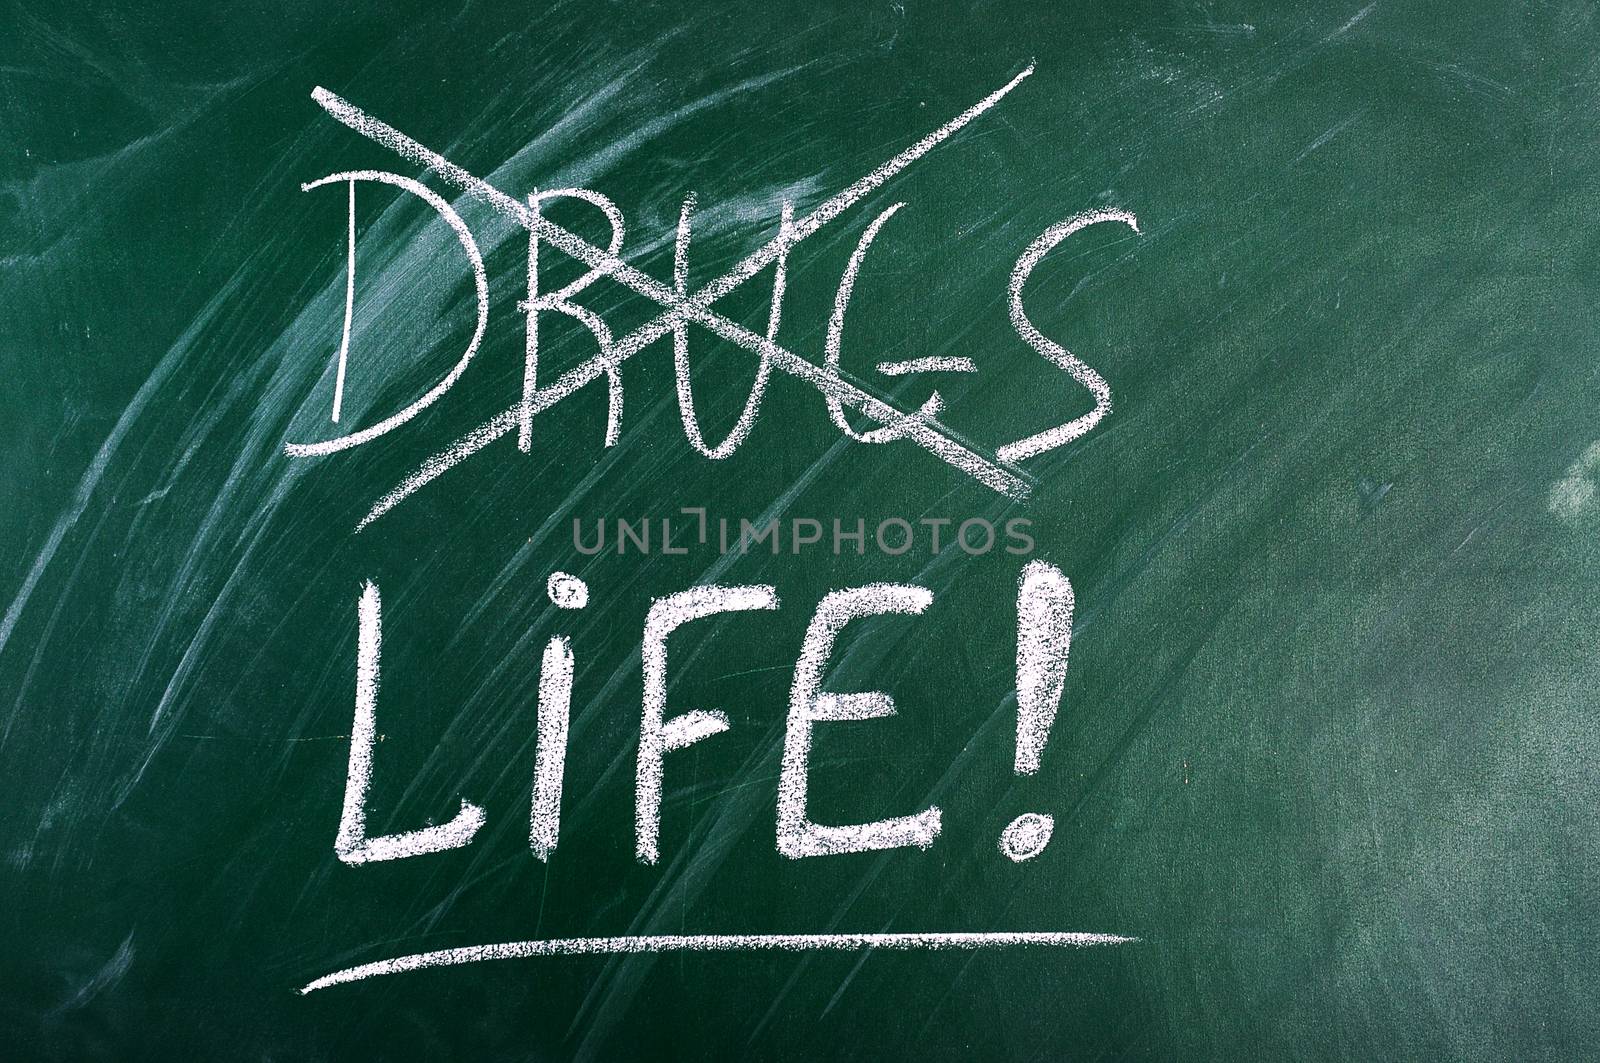 say no to drugs,choice life by ivosar